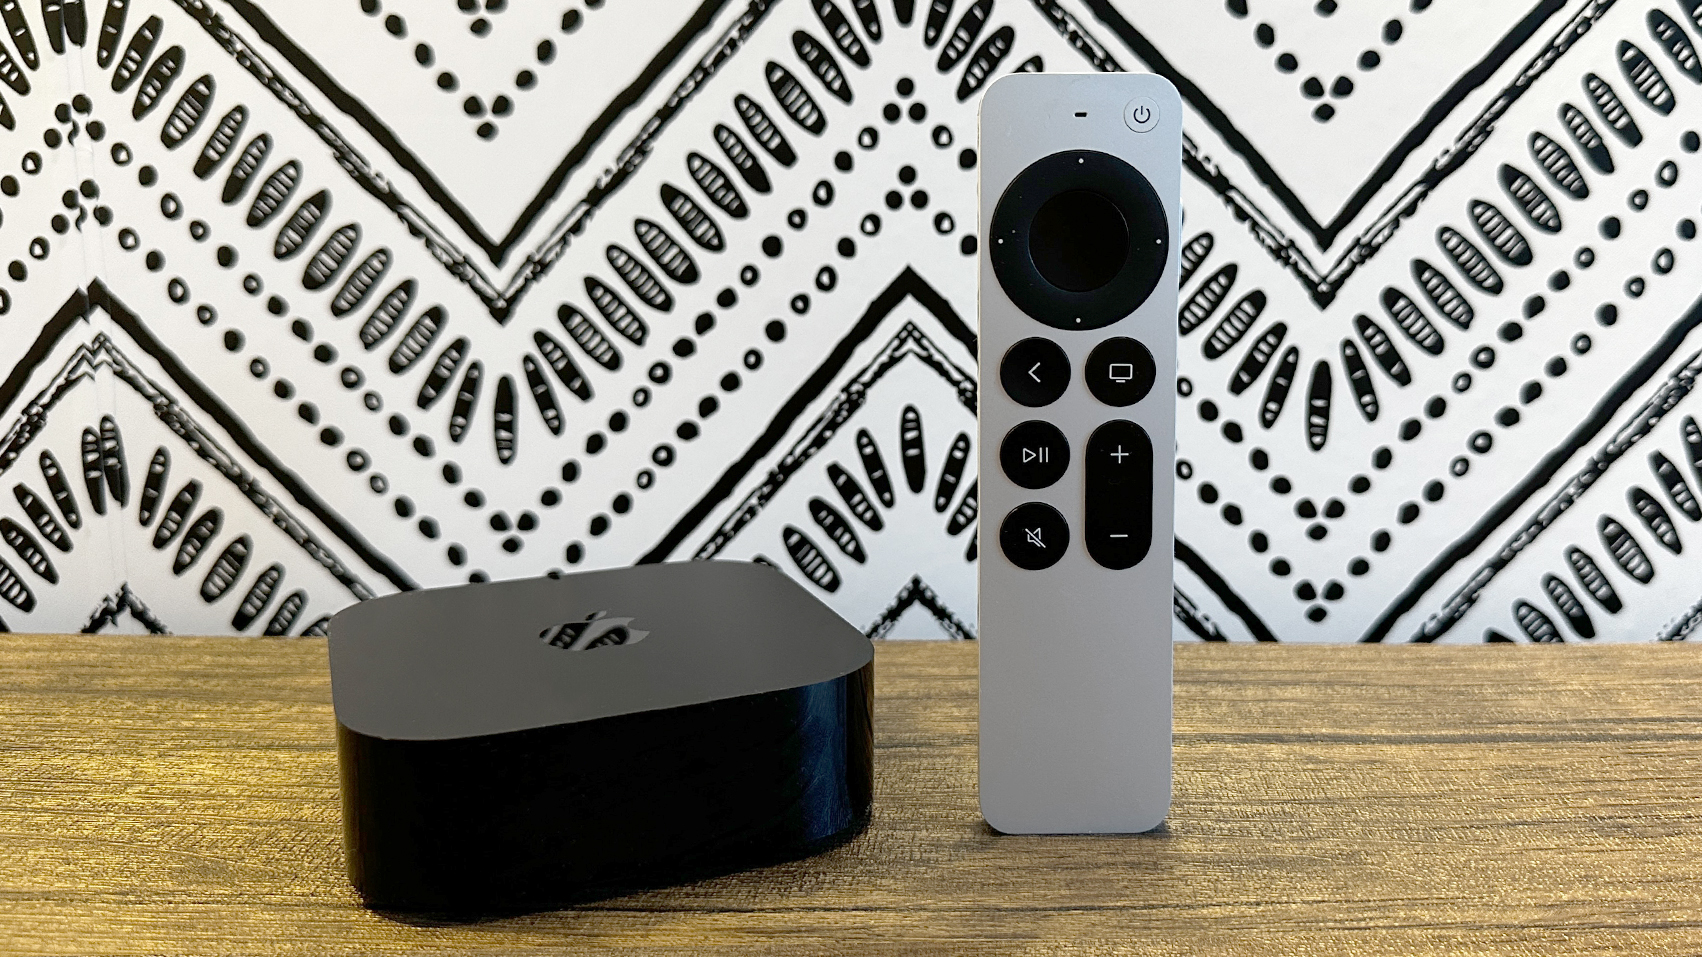 Apple TV 4K review: Apple is finally selling more for less